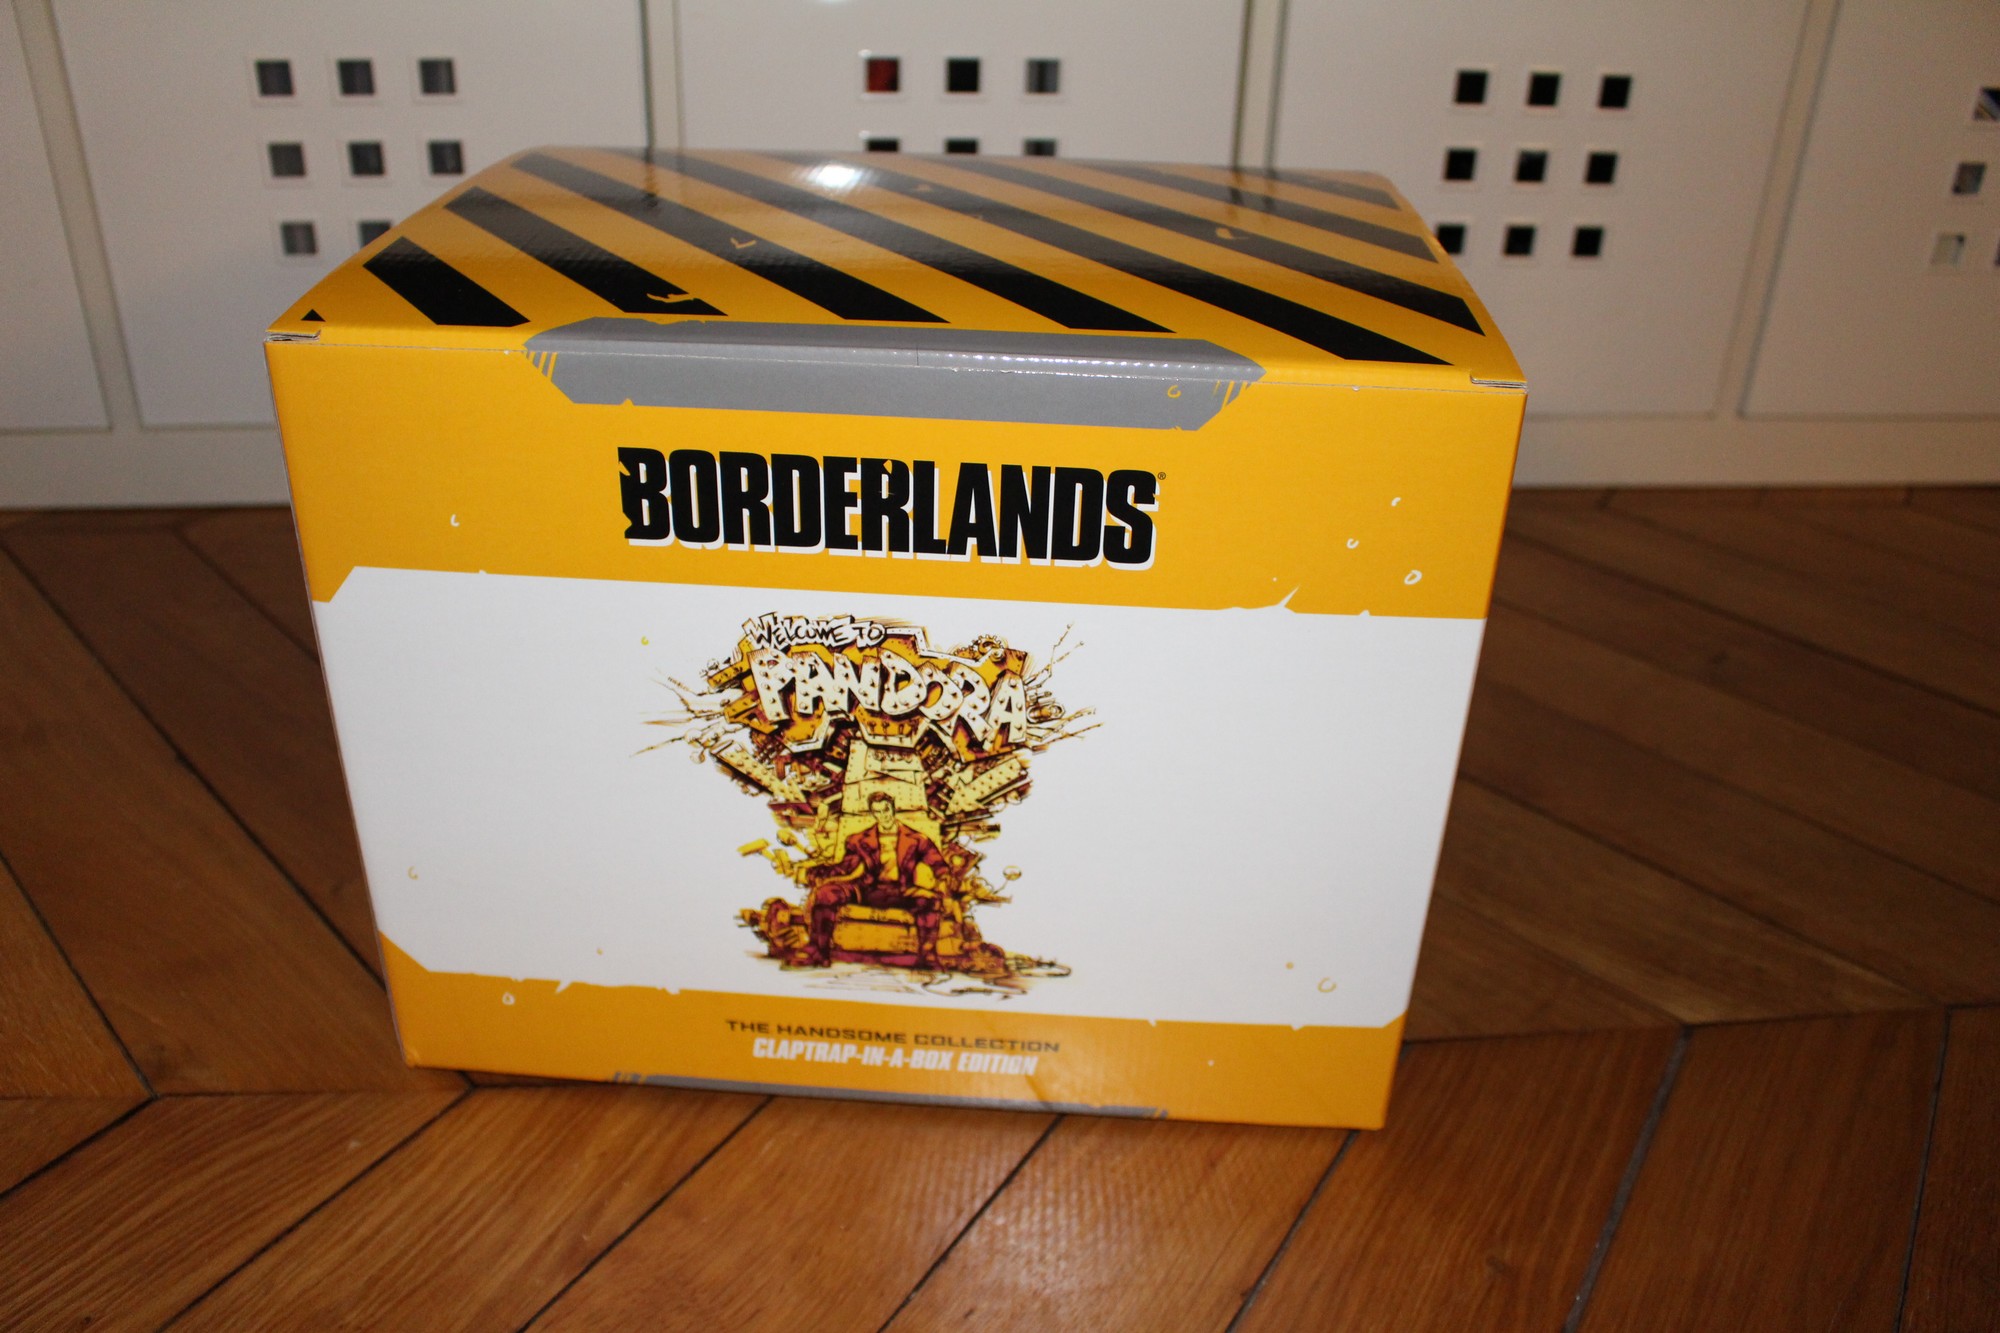 Unboxing Borderlands : The Handsome Collection Claptrap limited edition.